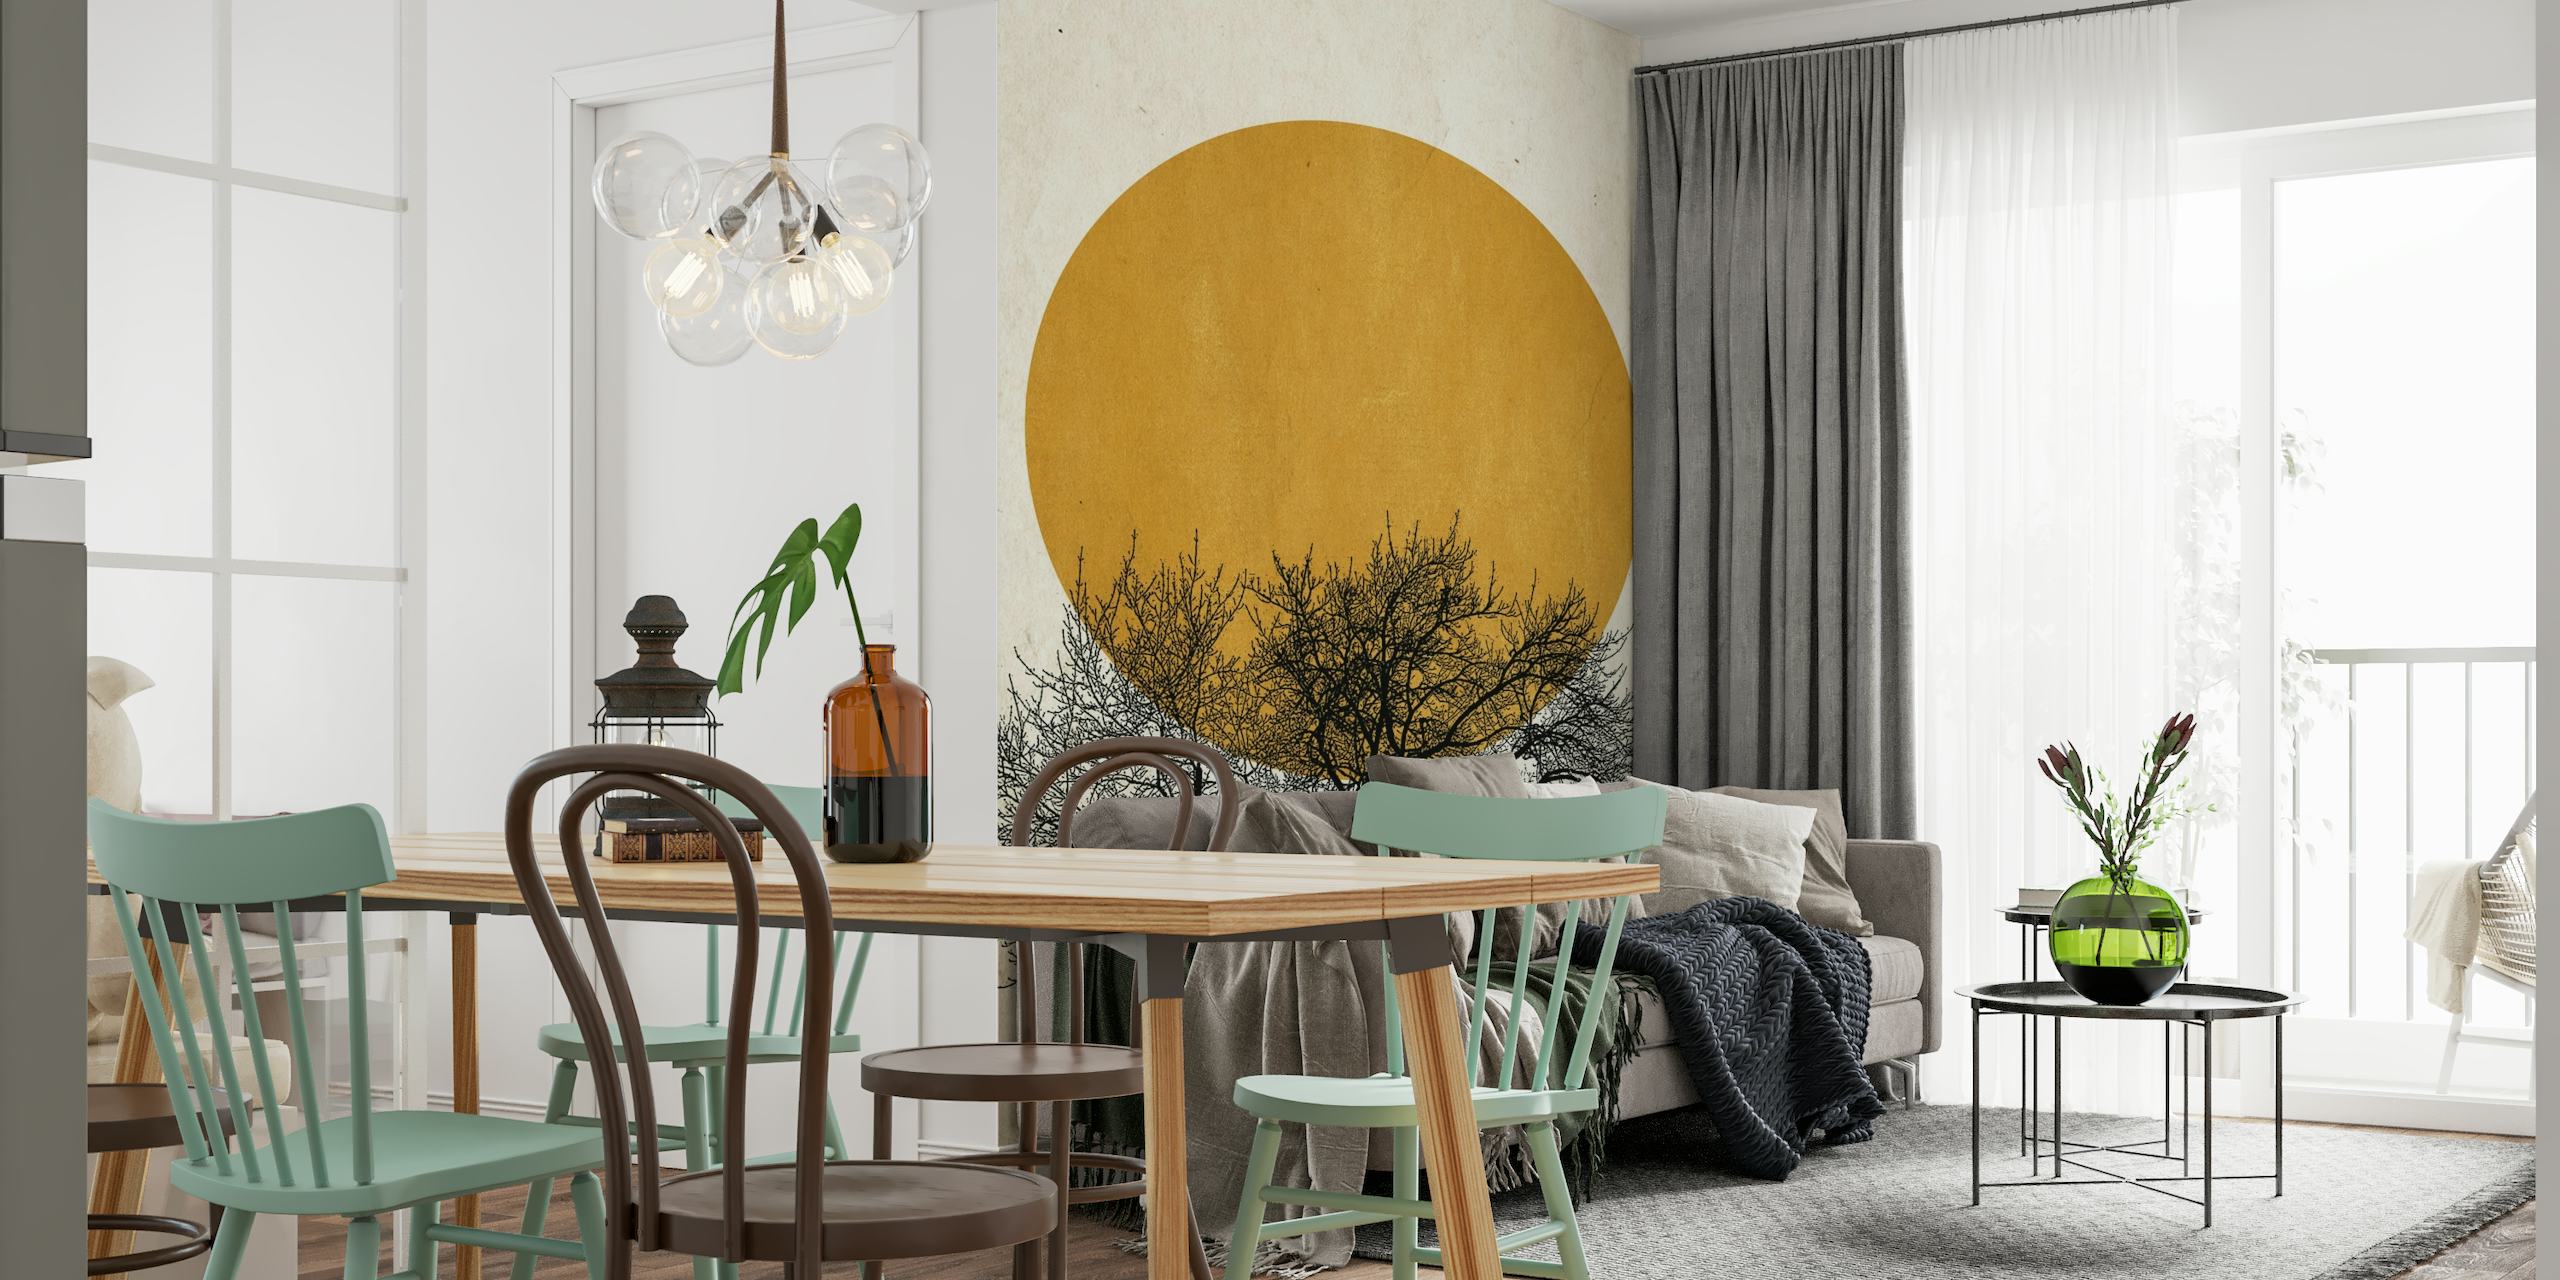 Wintermorgen wall mural featuring a solitary tree silhouette with a golden sun backdrop